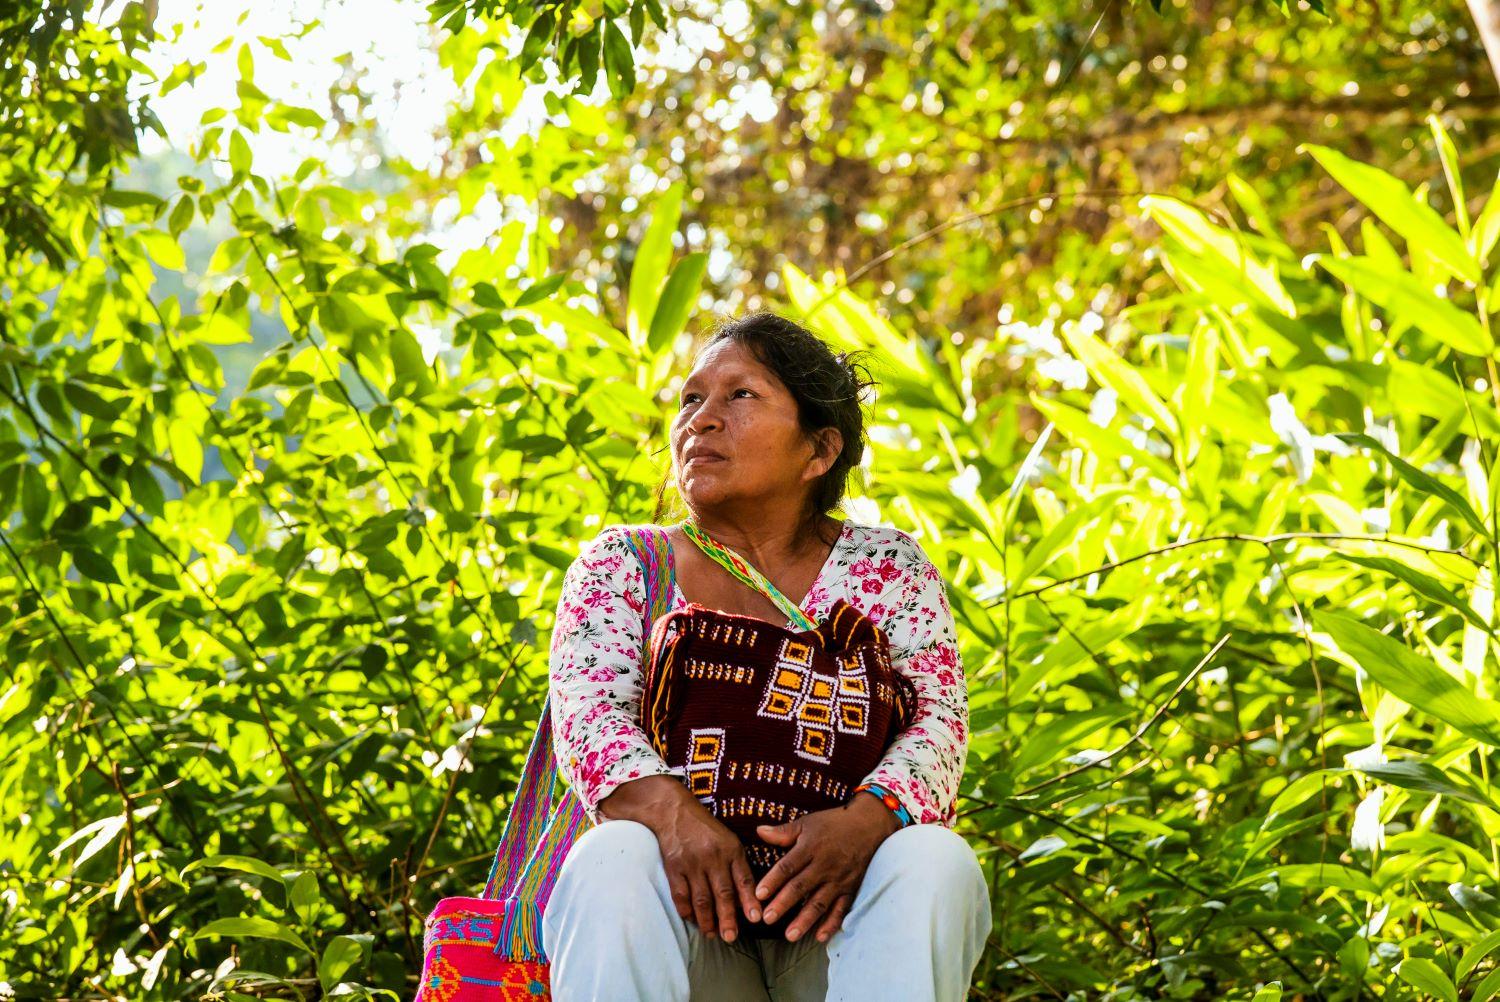 A woman in Colombia sits in front of greenery and looks into the distance. Photo: UN Women/Juan Camilo Arias